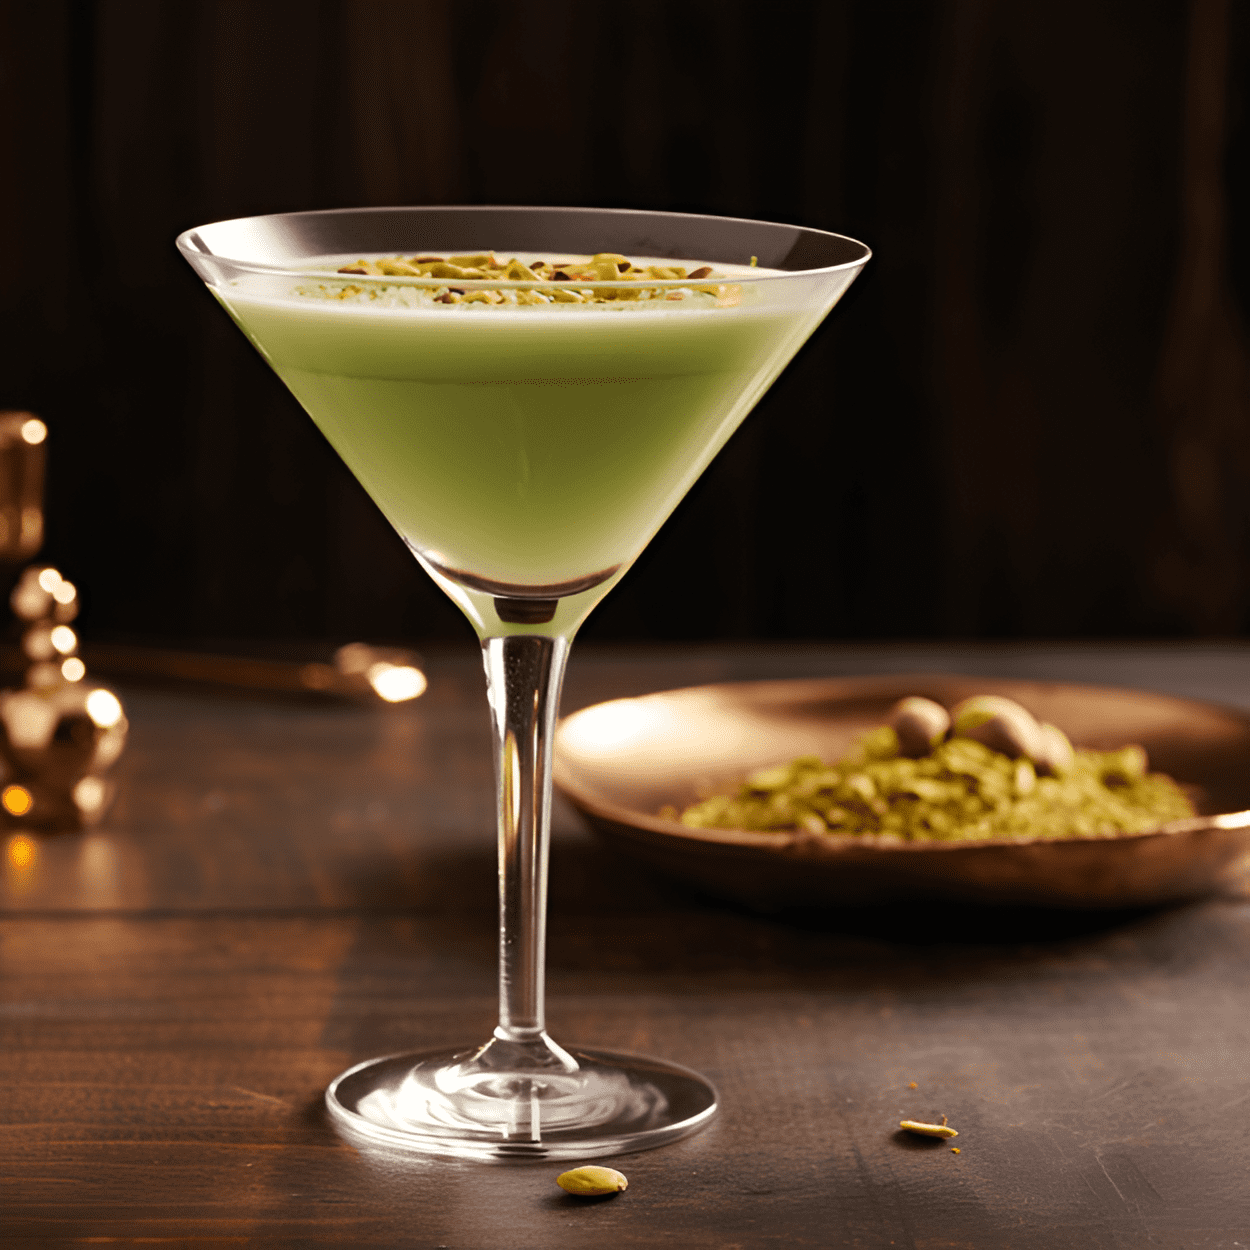 The Pistachio Dream is a creamy, sweet, and slightly nutty cocktail. It has a rich, velvety texture and a lingering taste of pistachio. The sweetness of the liqueur is balanced by the slight bitterness of the pistachios, creating a well-rounded and indulgent flavor profile.